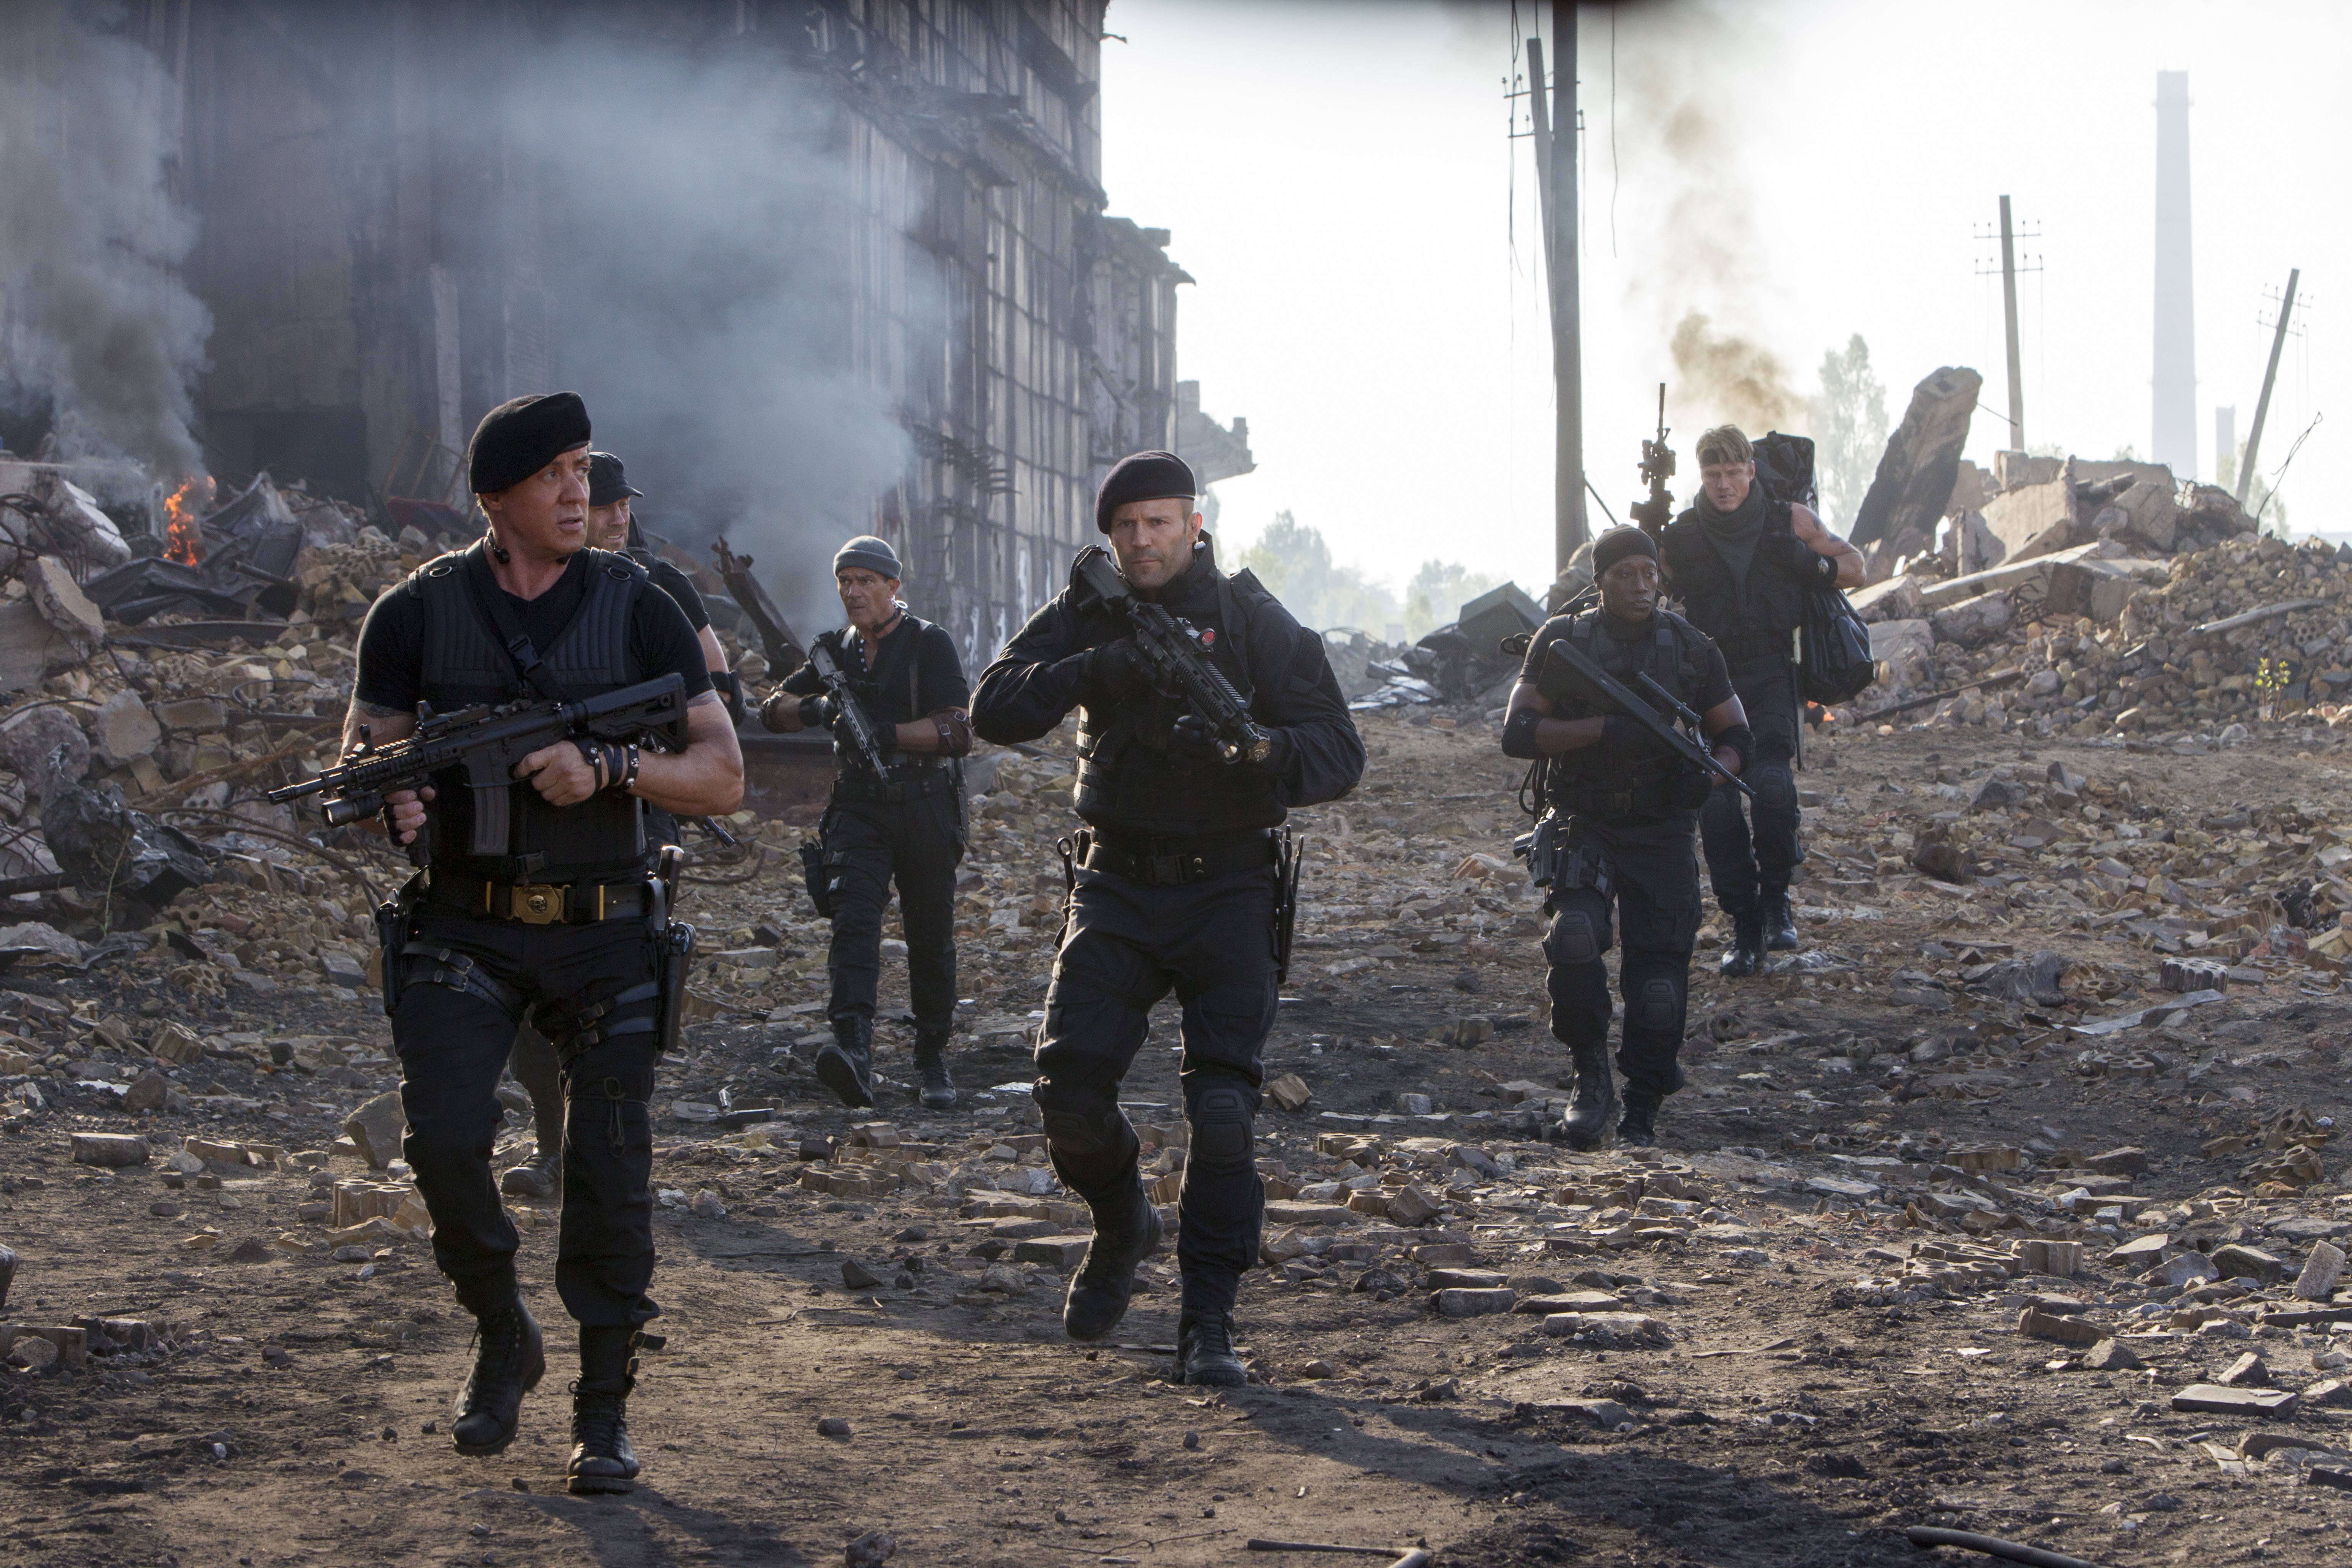 The Expendables 3 Barney Ross Sylvester Stallone Lee Christmas Jason Statham Wesley Snipes Doc The E 6144x4096